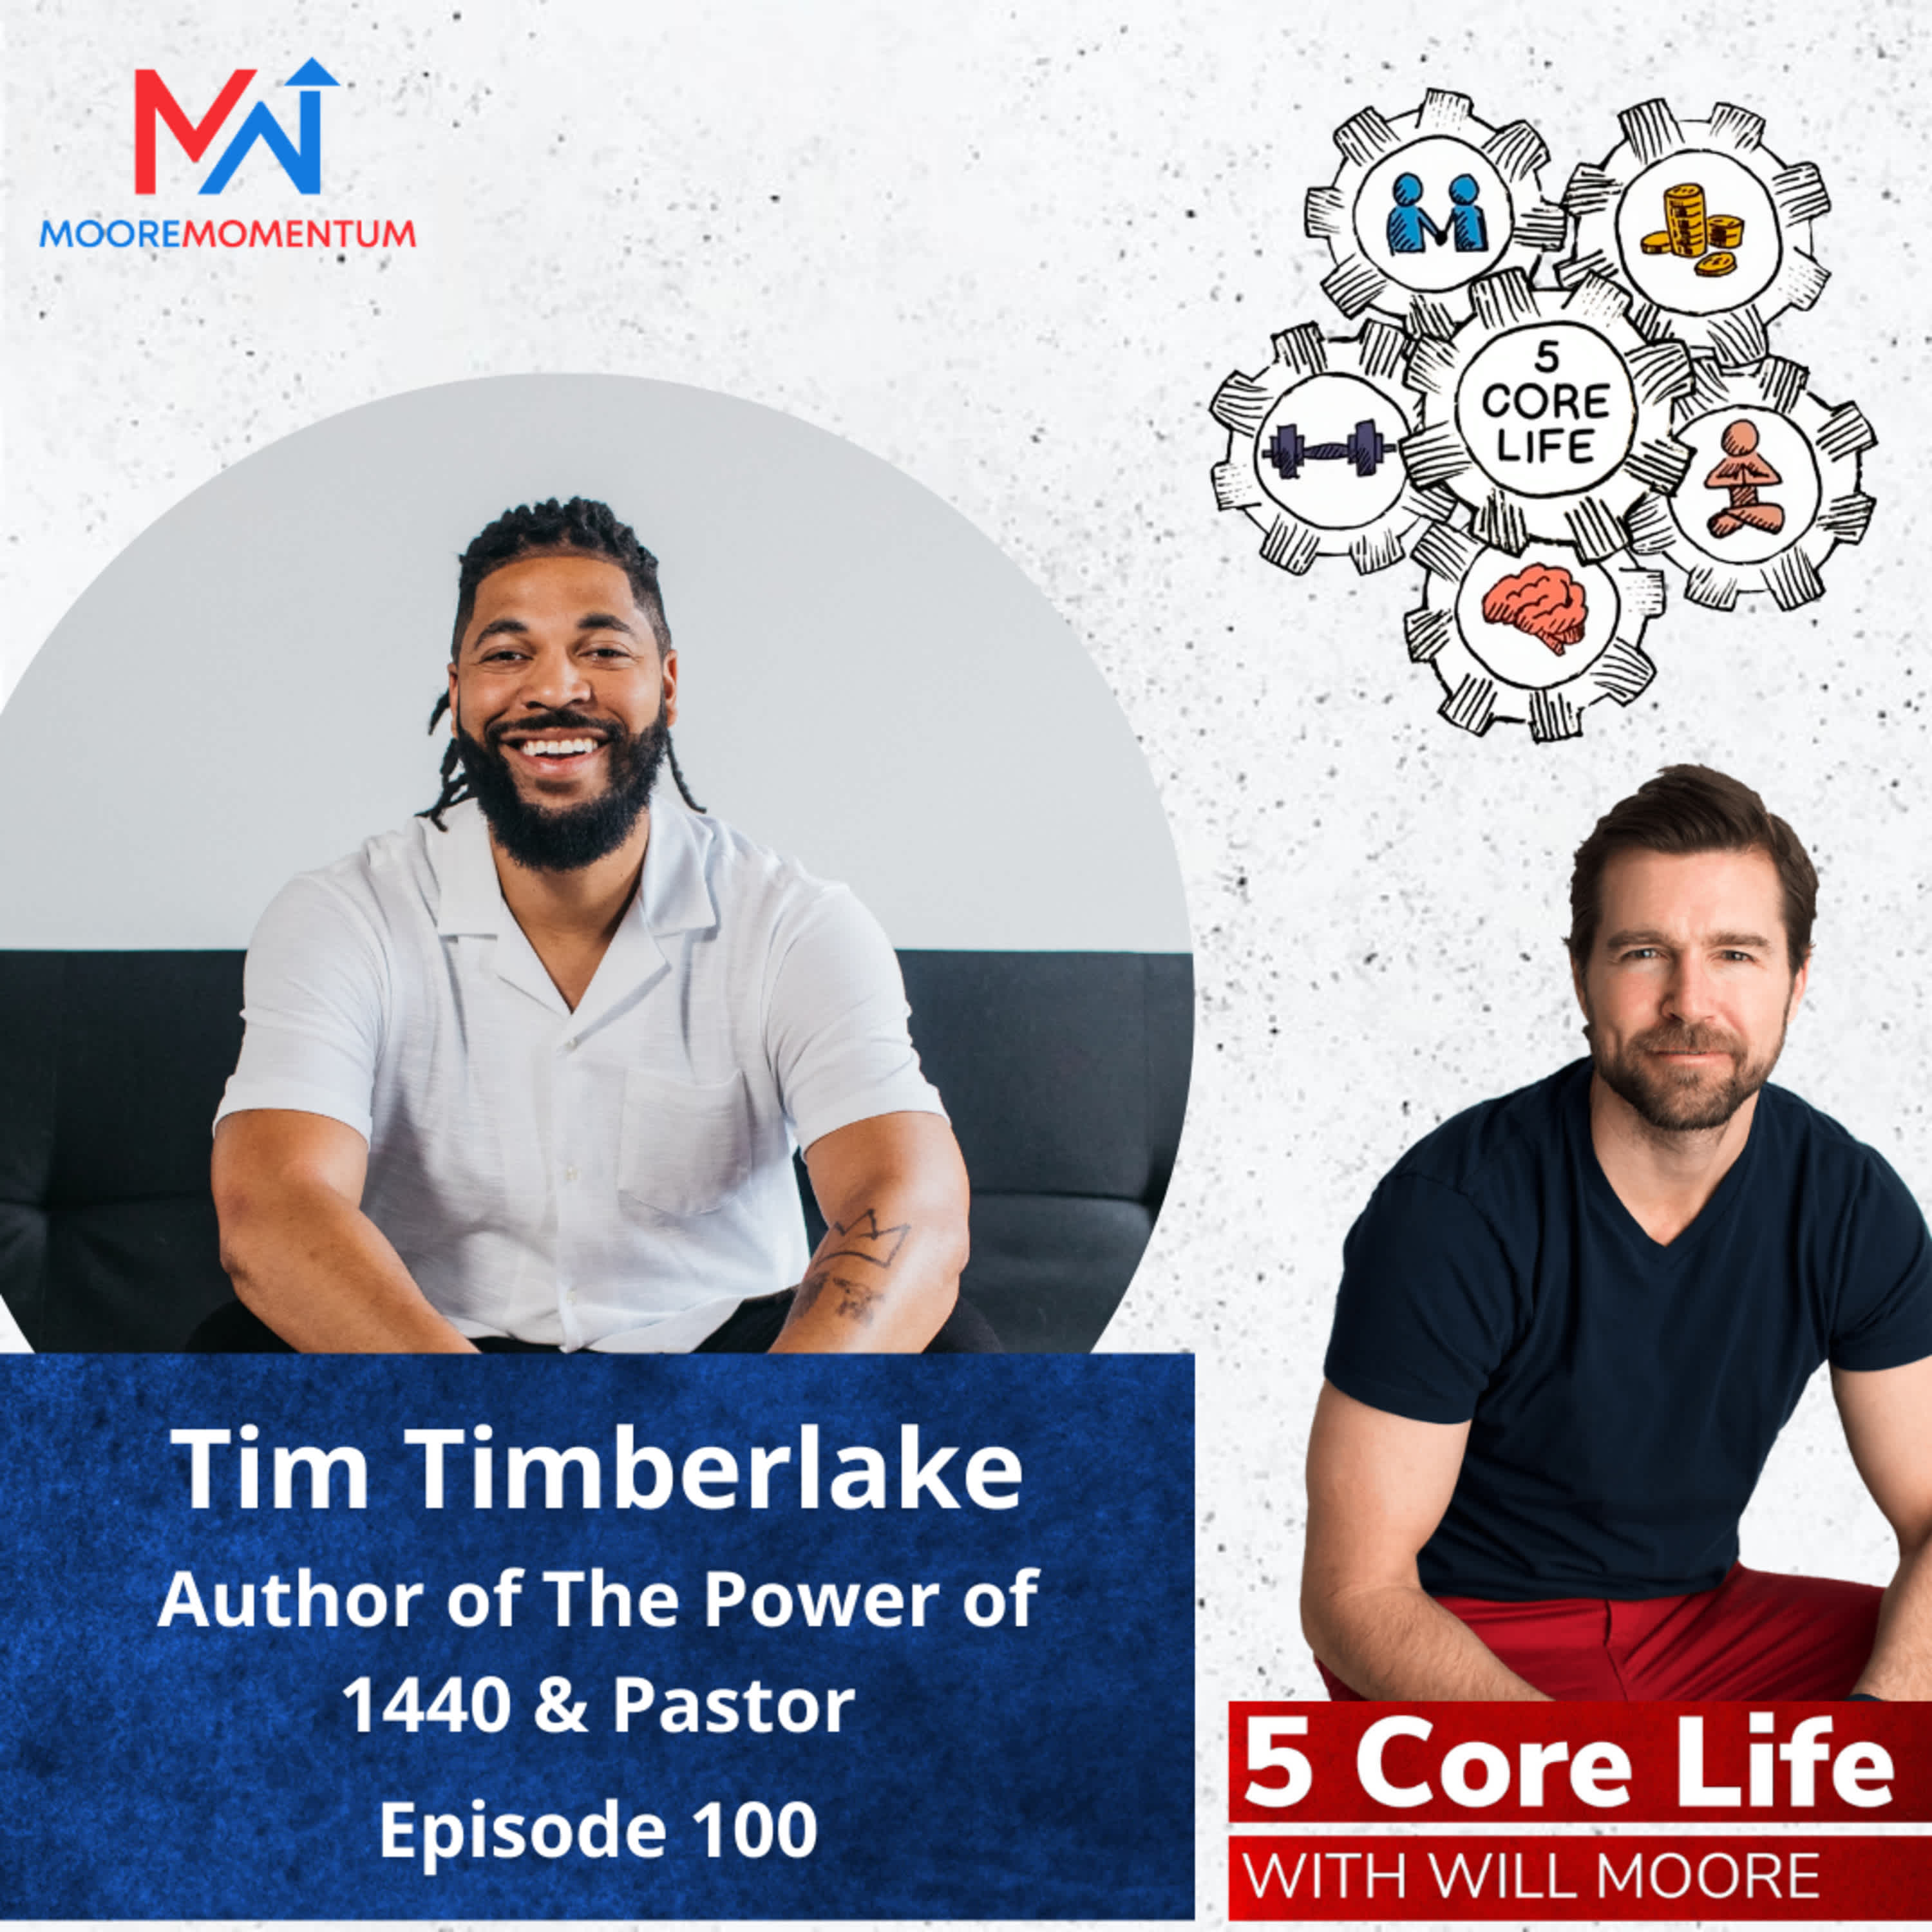 Reinvent Your Life and Realize Your Purpose | Tim Timberlake Author, Speaker, Pastor